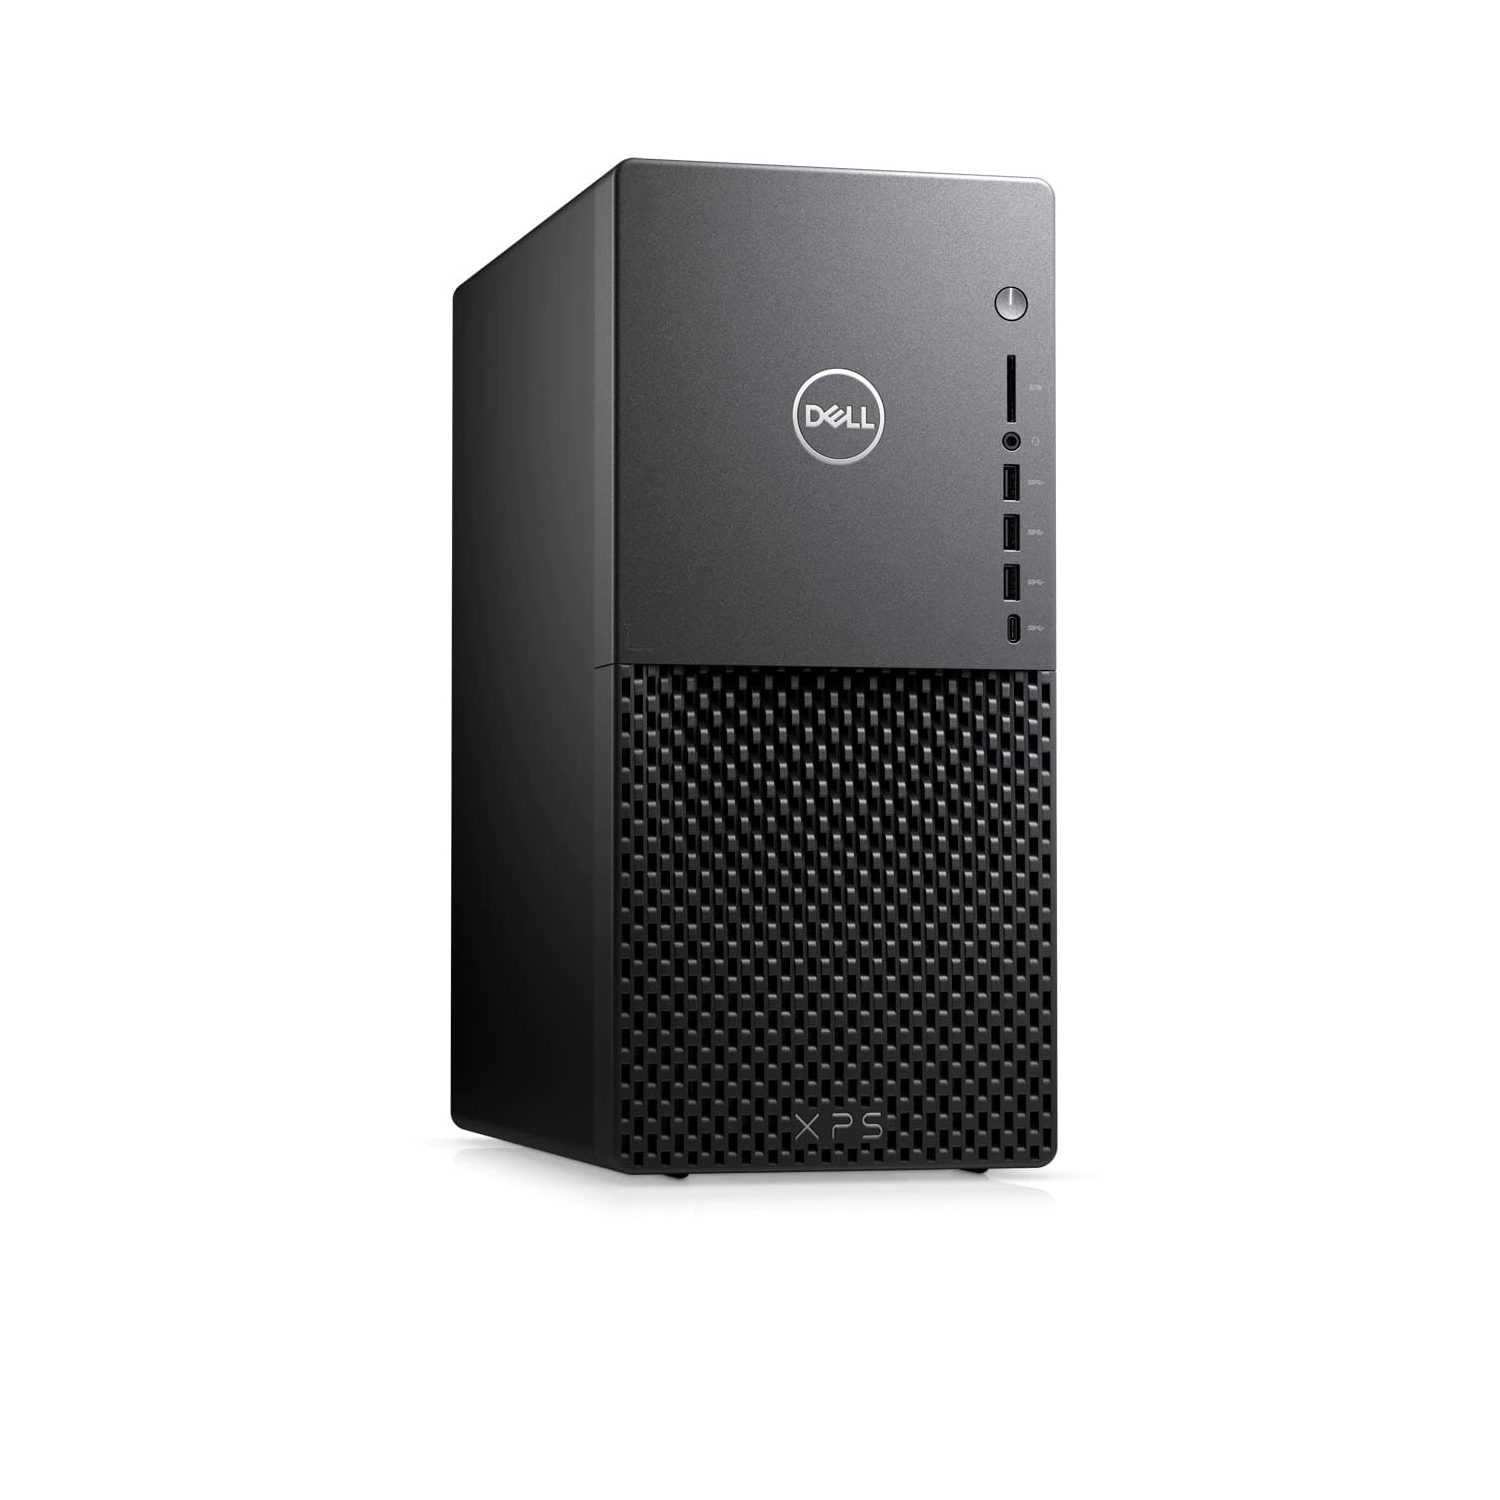 Refurbished (Excellent) - Dell XPS 8940 Desktop (2020) | Core i7 - 1TB SSD + 1TB HDD - 16GB RAM - RTX 3070 | 8 Cores @ 4.8 GHz - 10th Gen CPU Certified Refurbished